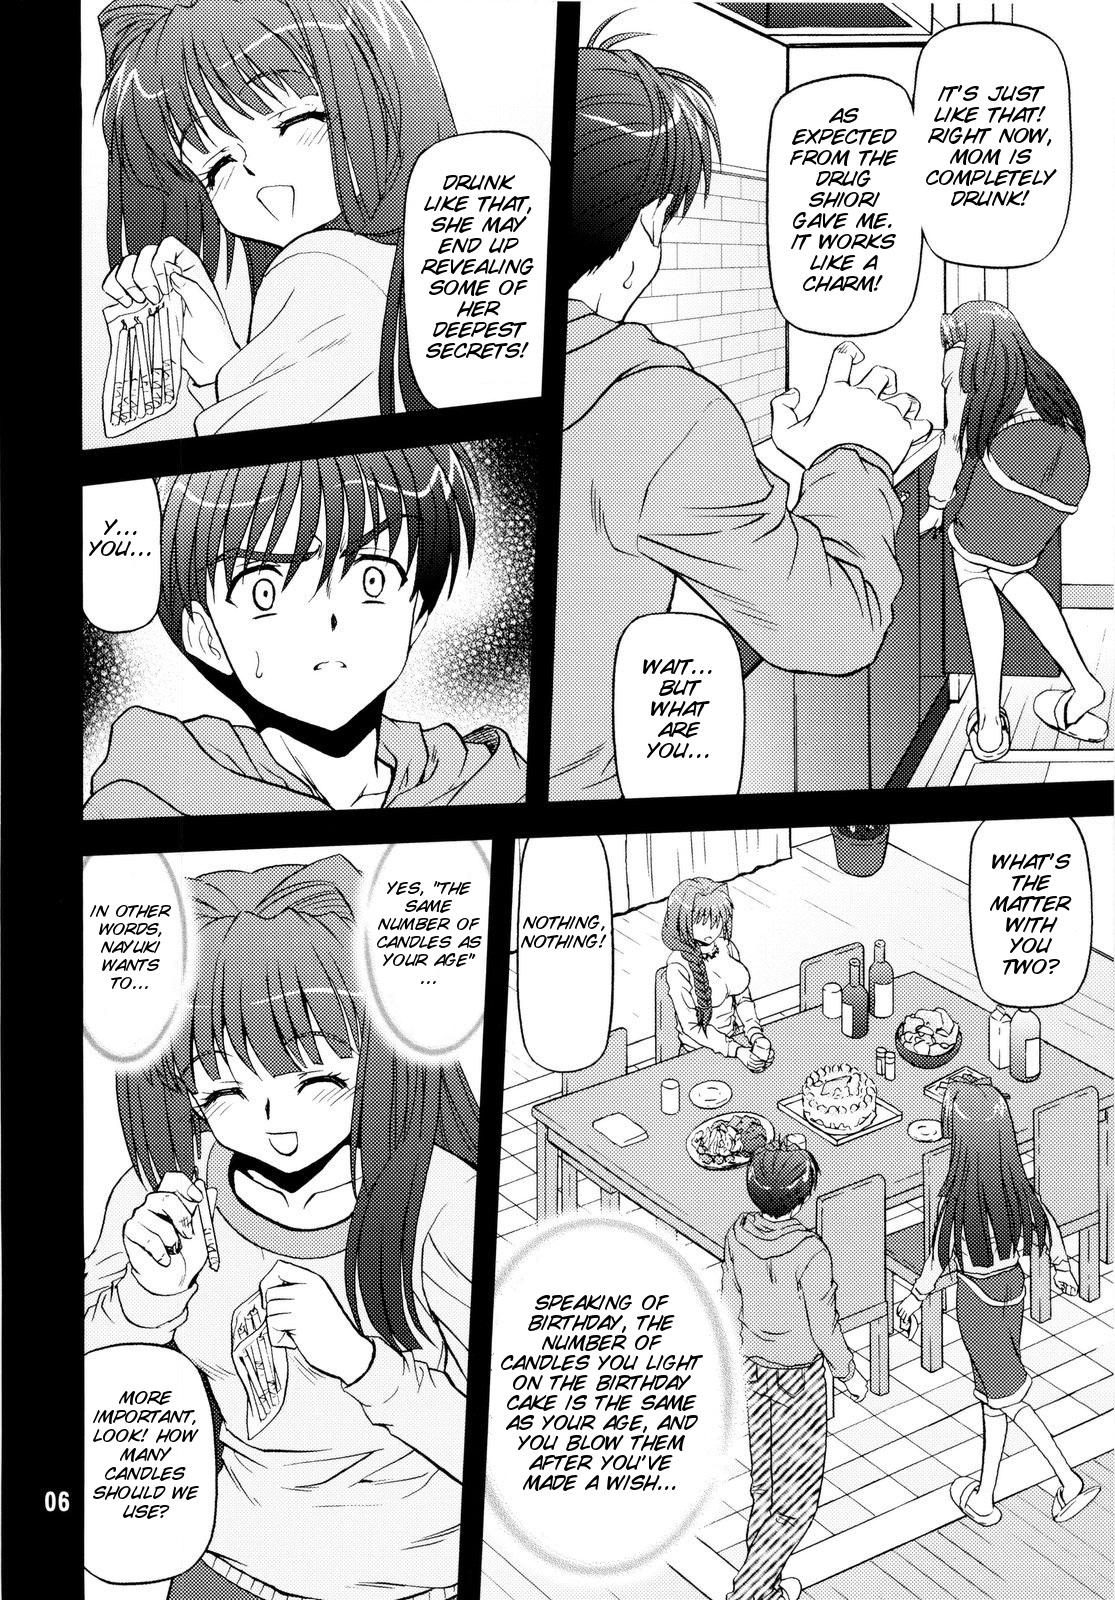 Gay Bus BLUE BLOOD'S vol. 24 - Kanon Lips - Page 7